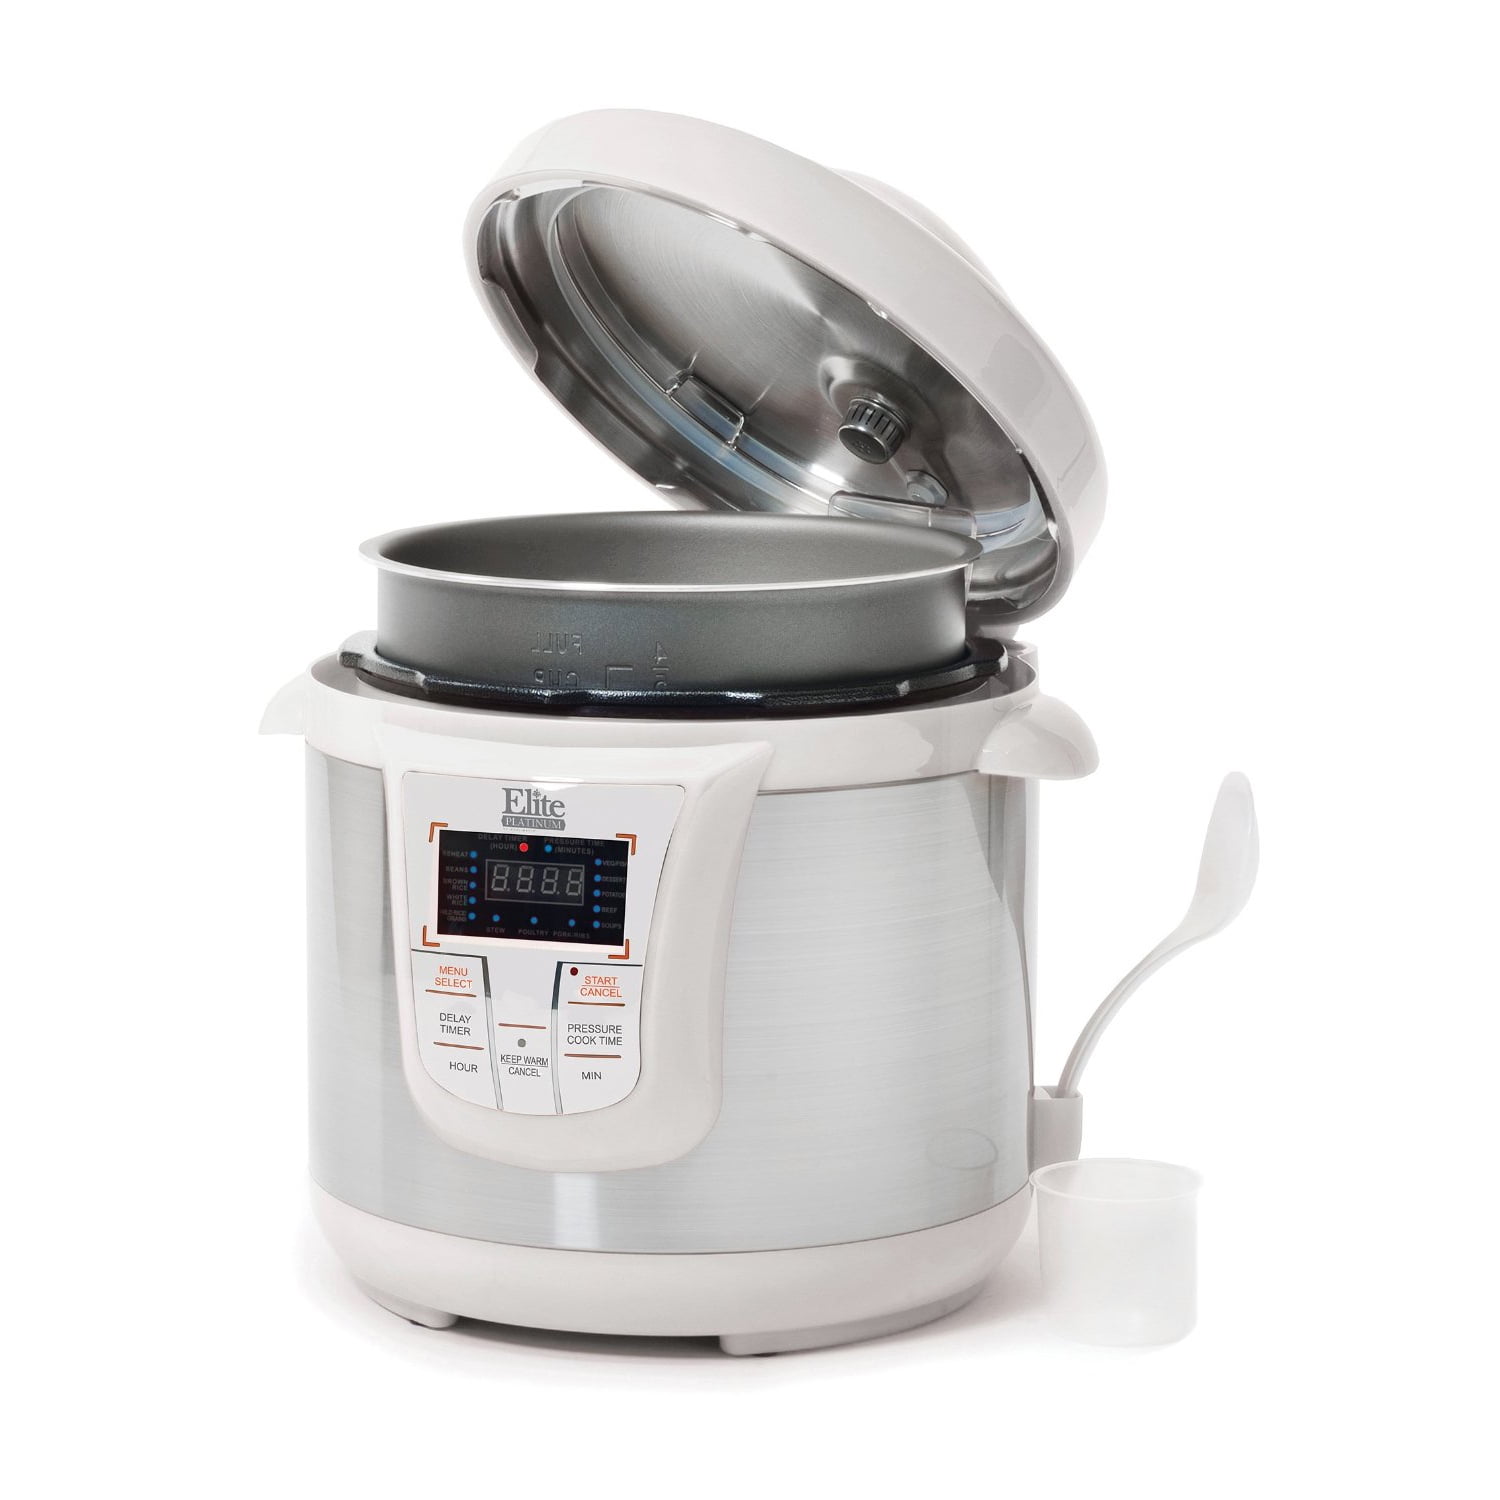 Elite Platinum NEW and IMPROVED EPC-1013 10 Quart Electric Pressure Cooker,  Stainless Steel